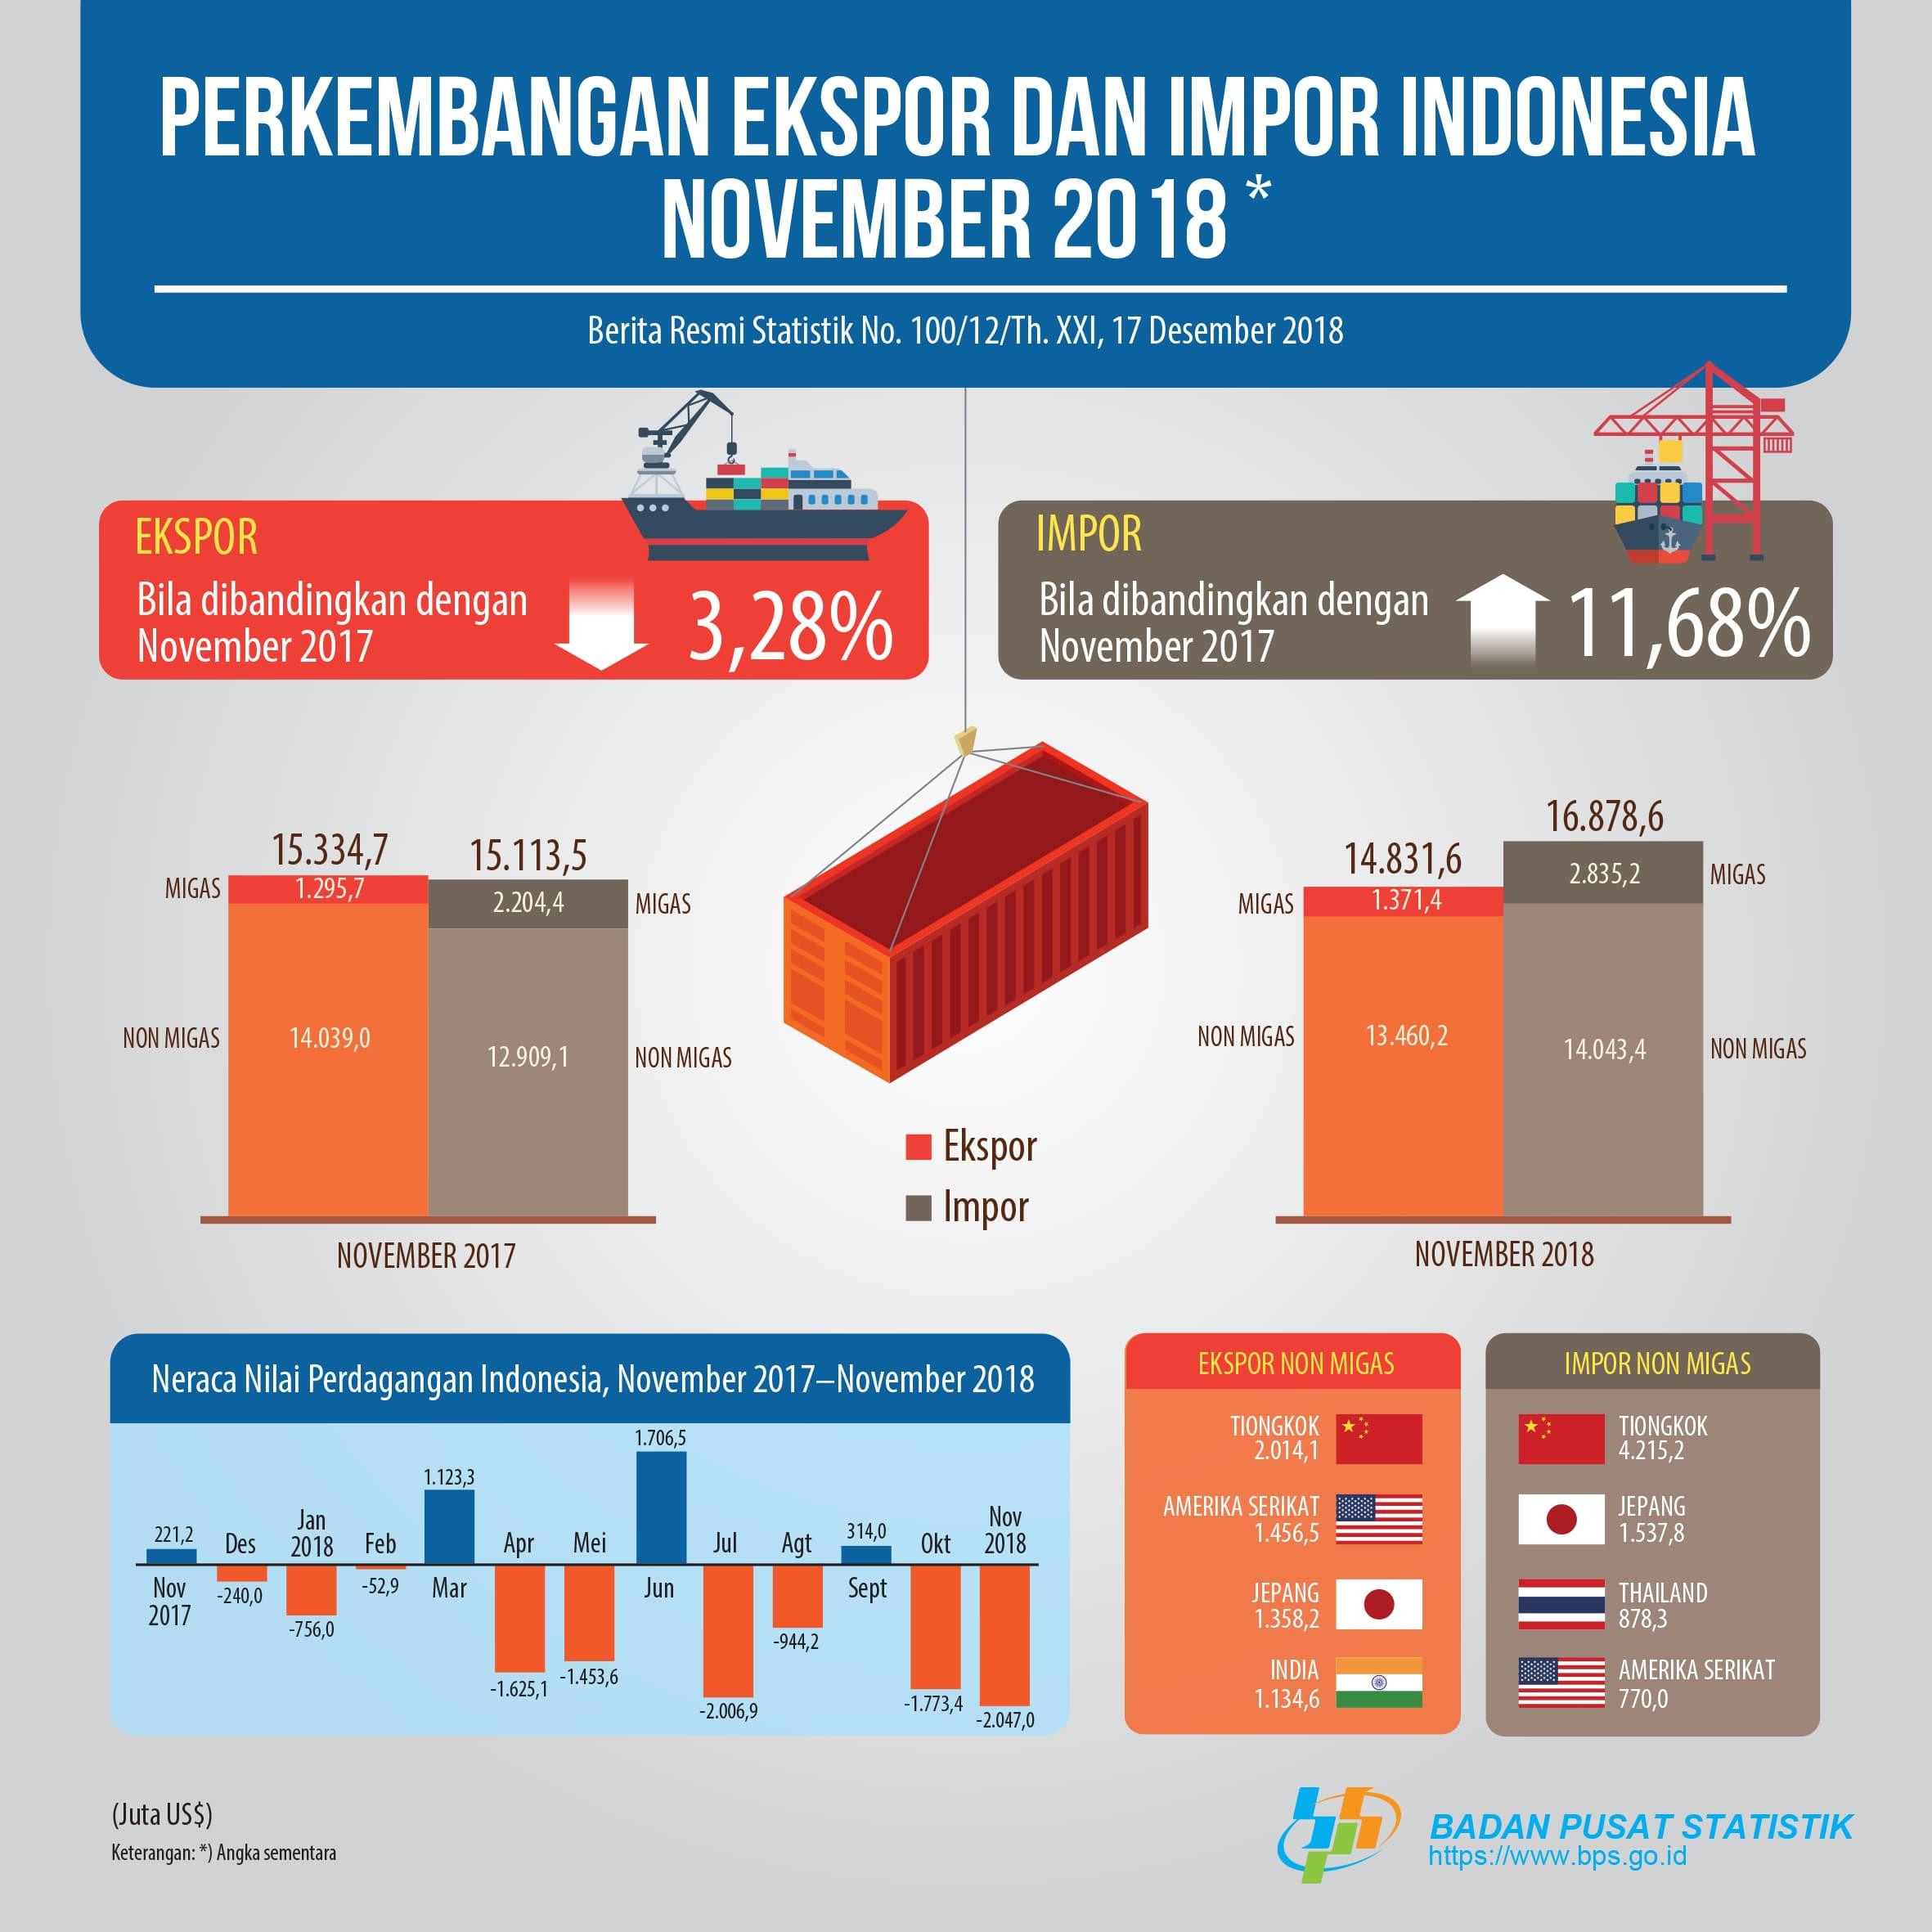 November 2018 Exports Reached US $ 14.83 Billion. Imports in November 2018 amounted to US $ 16.88 billion, decreased 4.47 percent compared to October 2018.